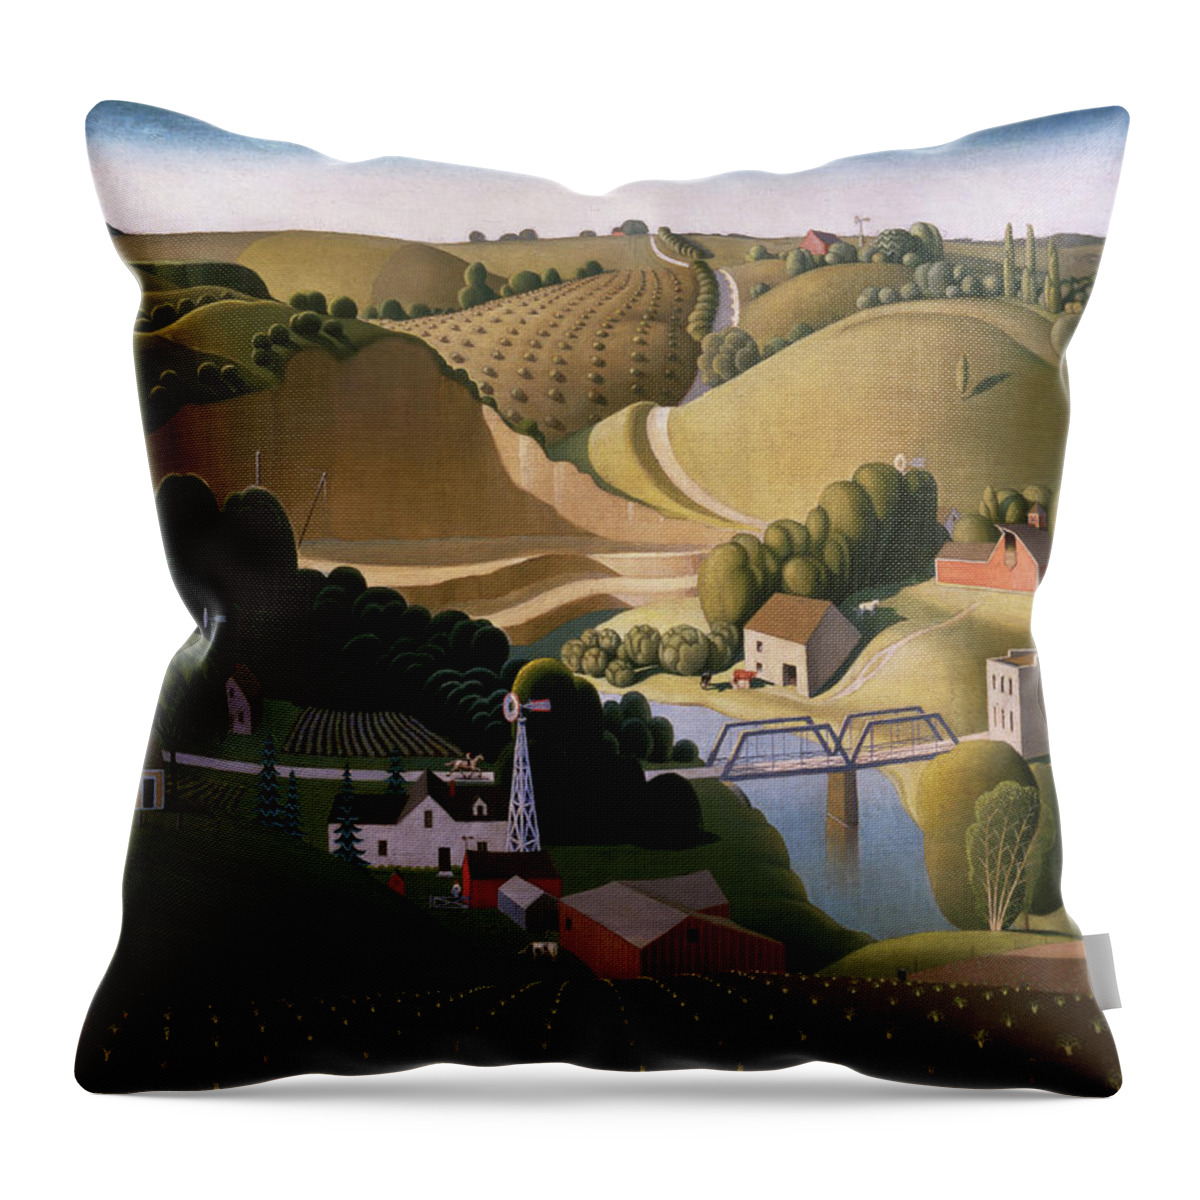 Grant Wood Throw Pillow featuring the painting Stone City, 1930 by Grant Wood